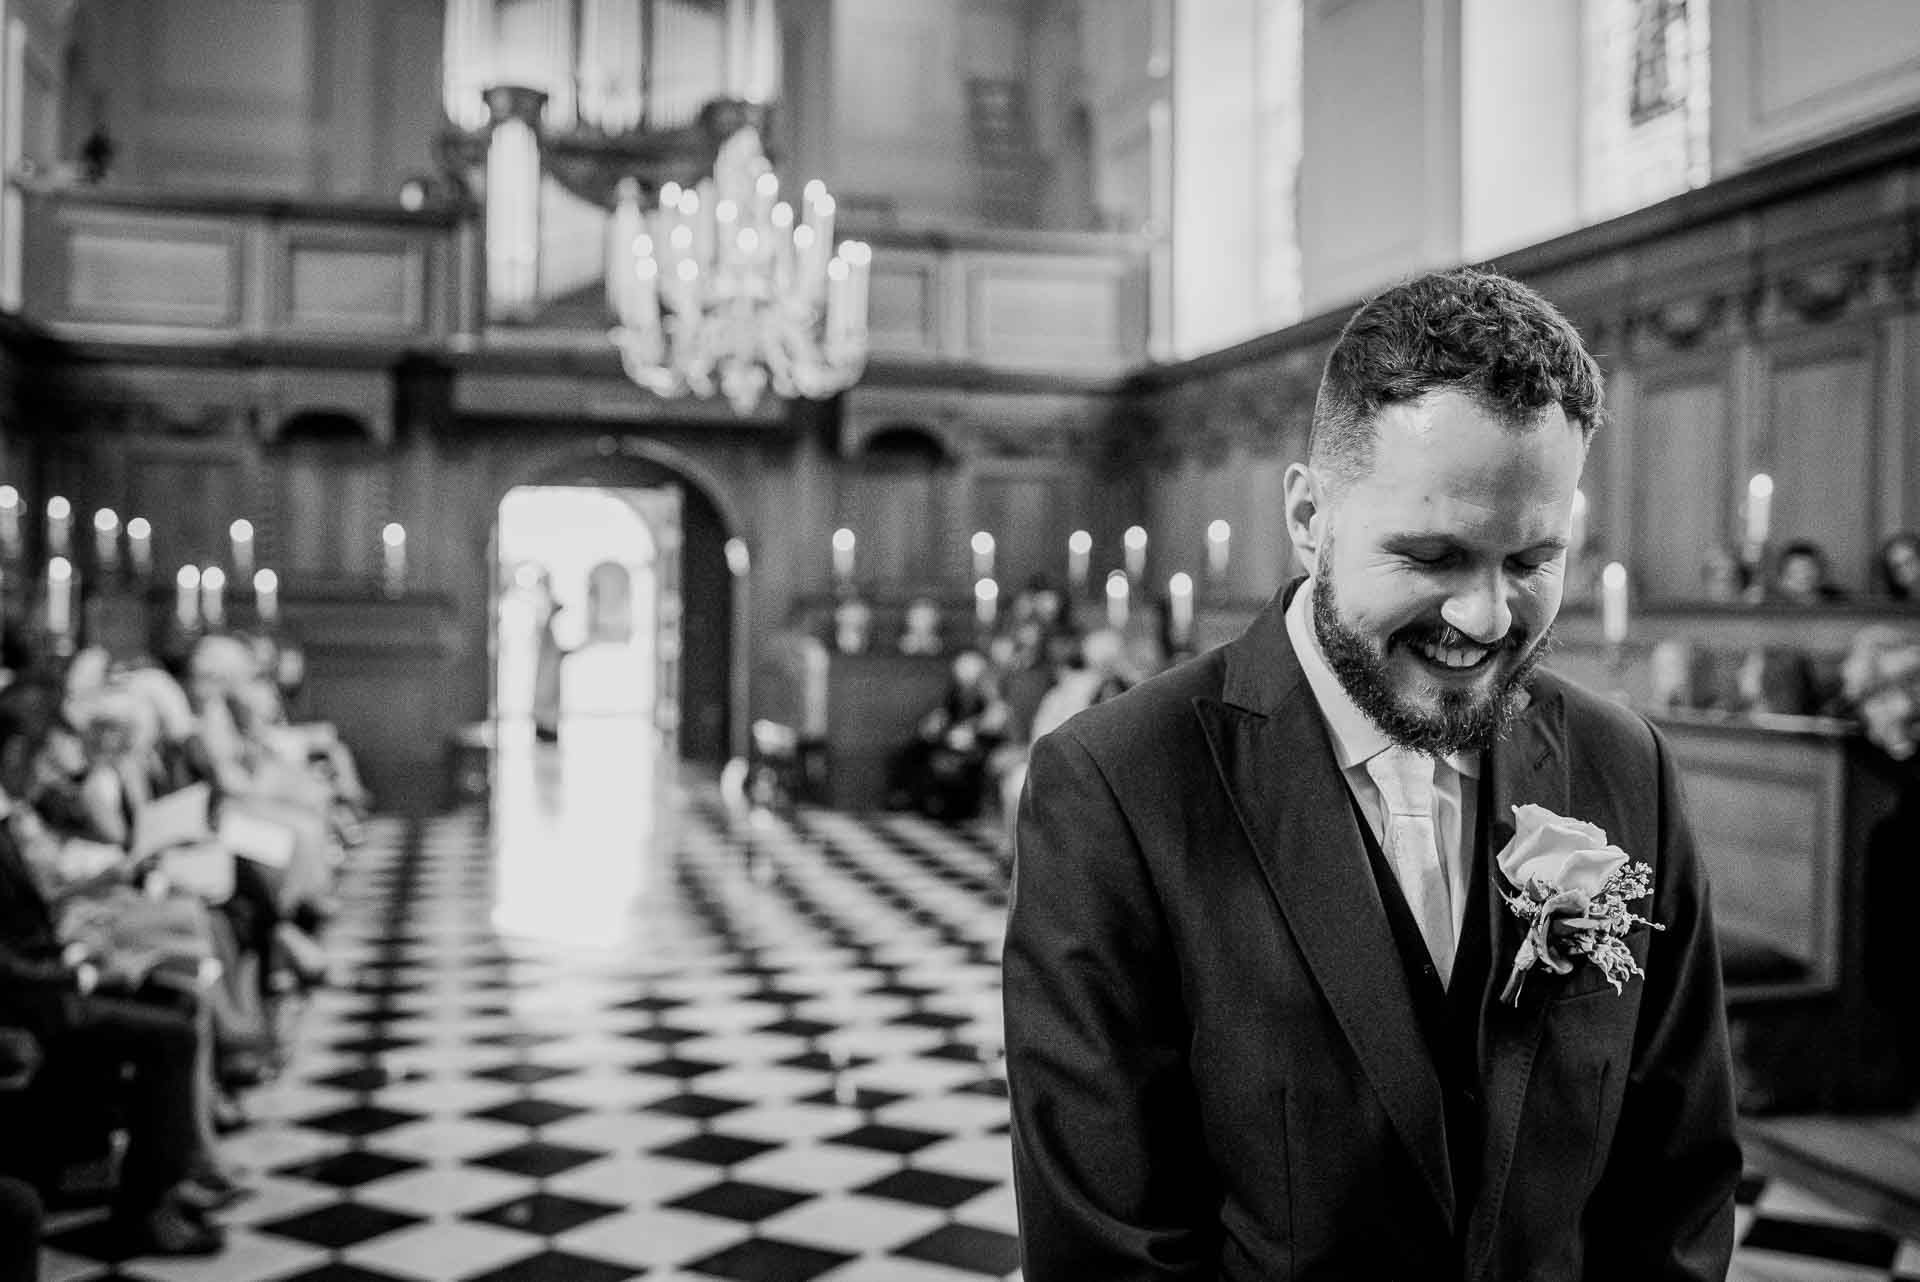 Nic waiting for Leah to arrive in the chapel ahead of their wedding ceremony at Emmanuel College in Cambridge. Photography by Damien Vickers Photography.